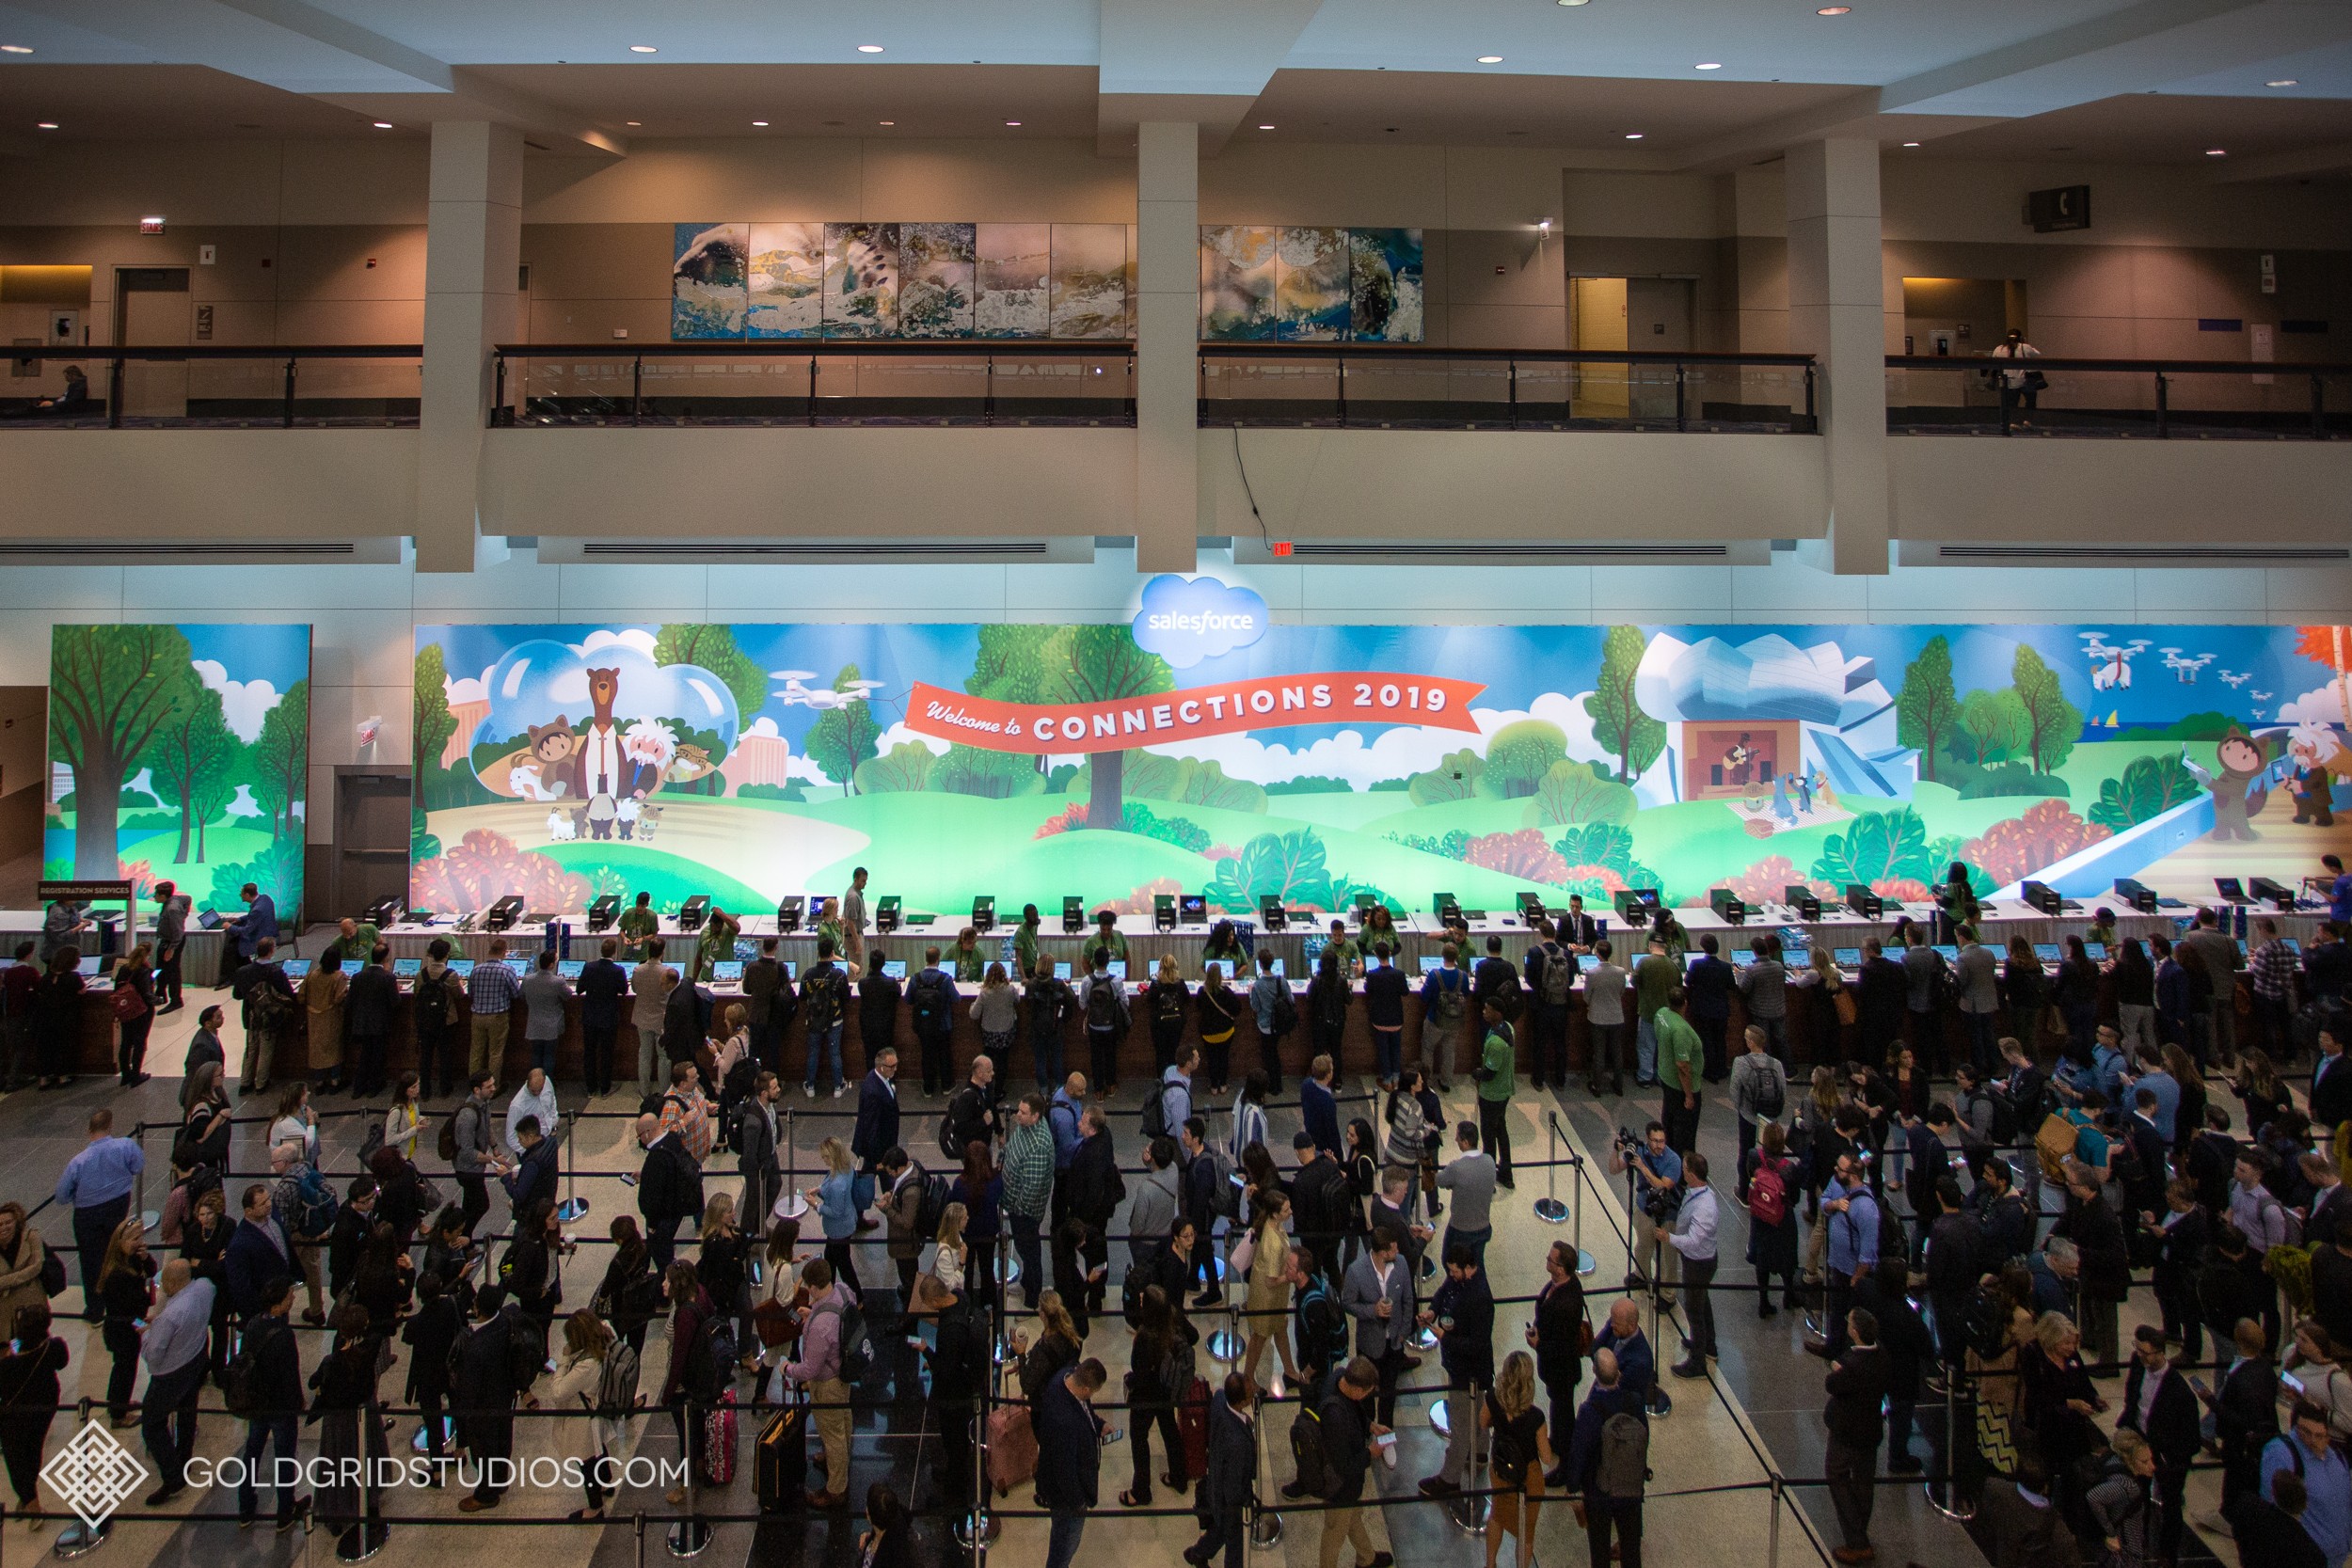 Registration area at Salesforce Connections 2019 at McCormick Place.